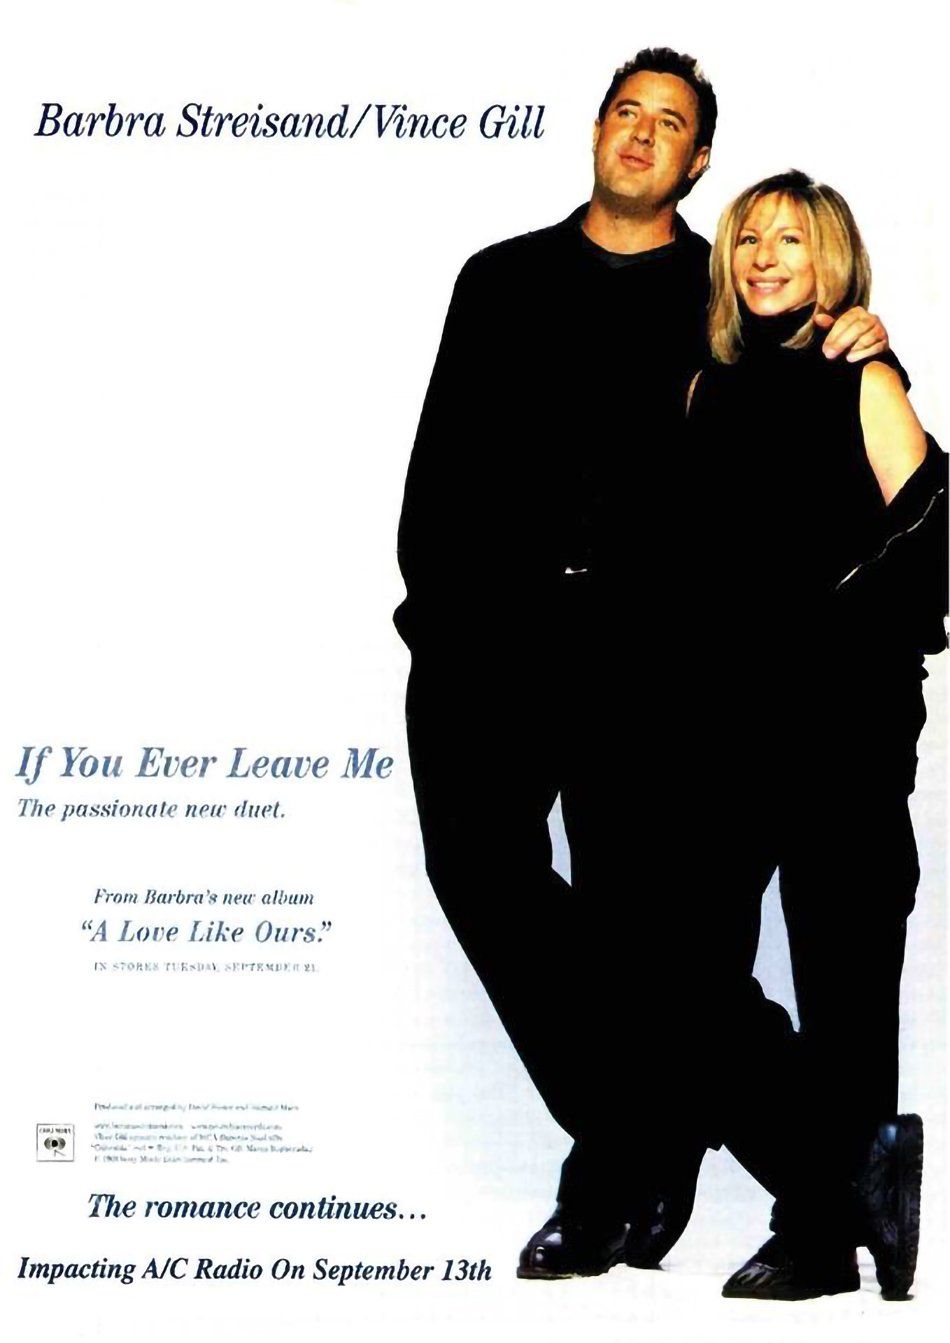 Columbia Records ad for the Vince Gill duet